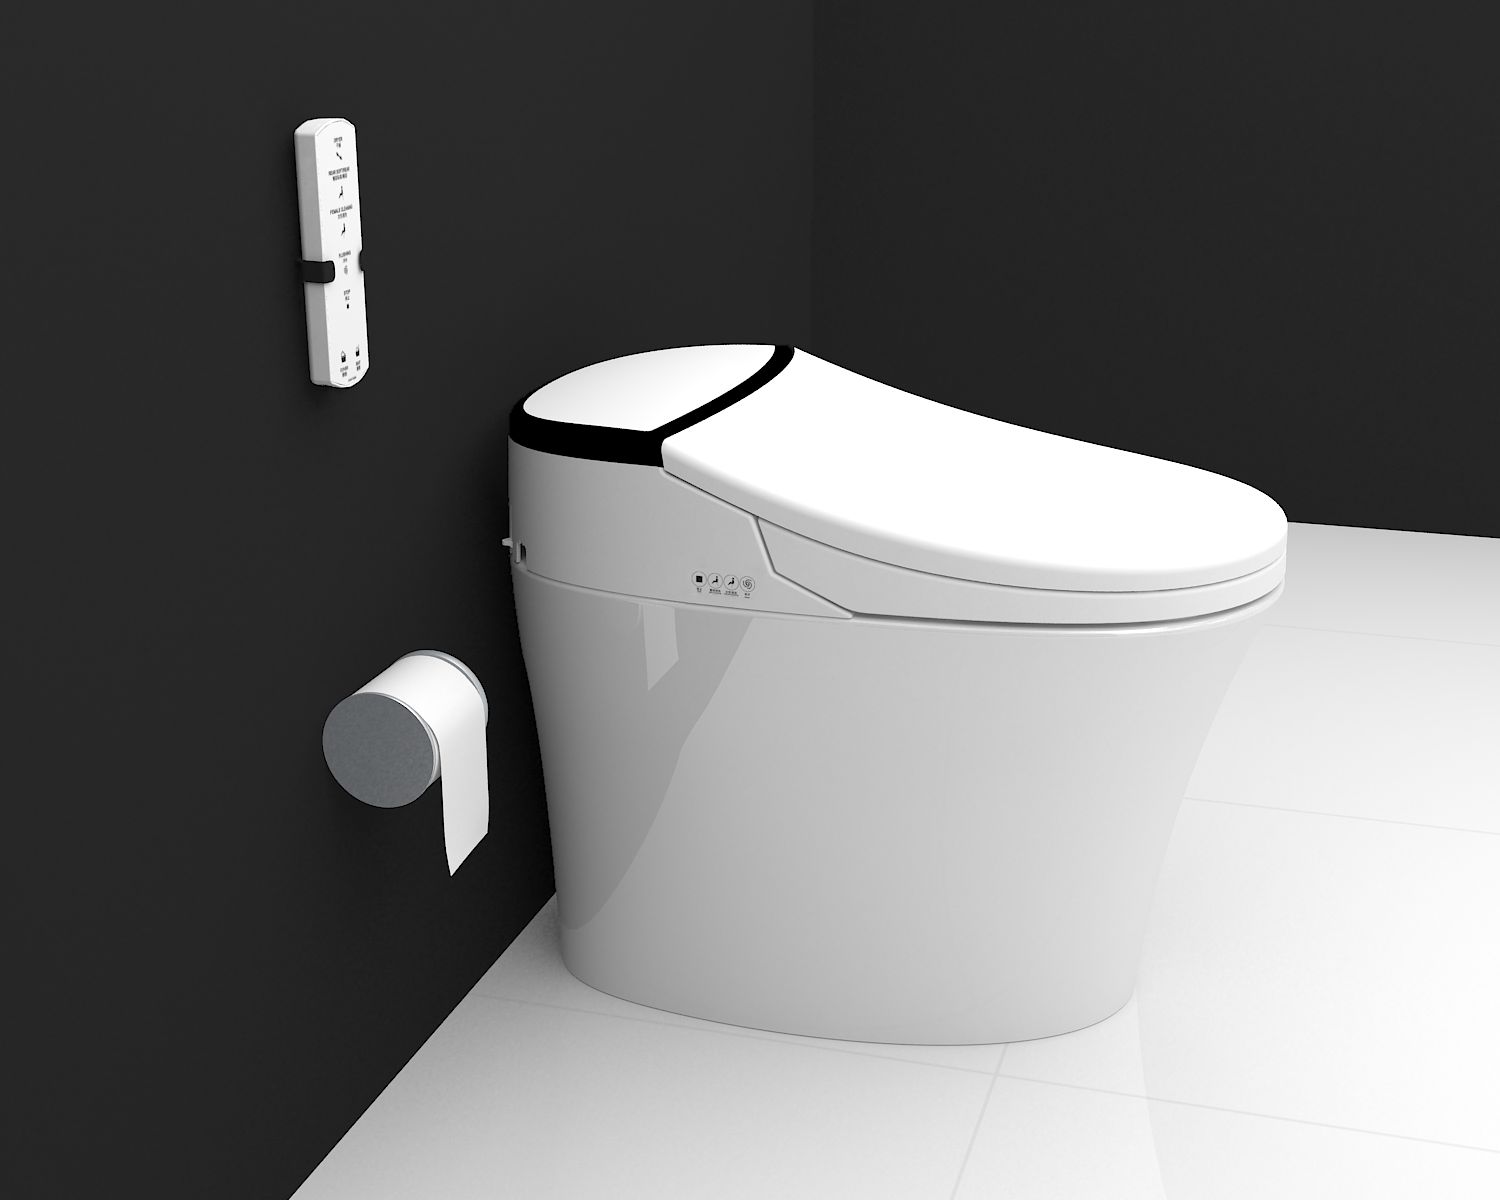 The development trend of the smart toilet industry in 2022